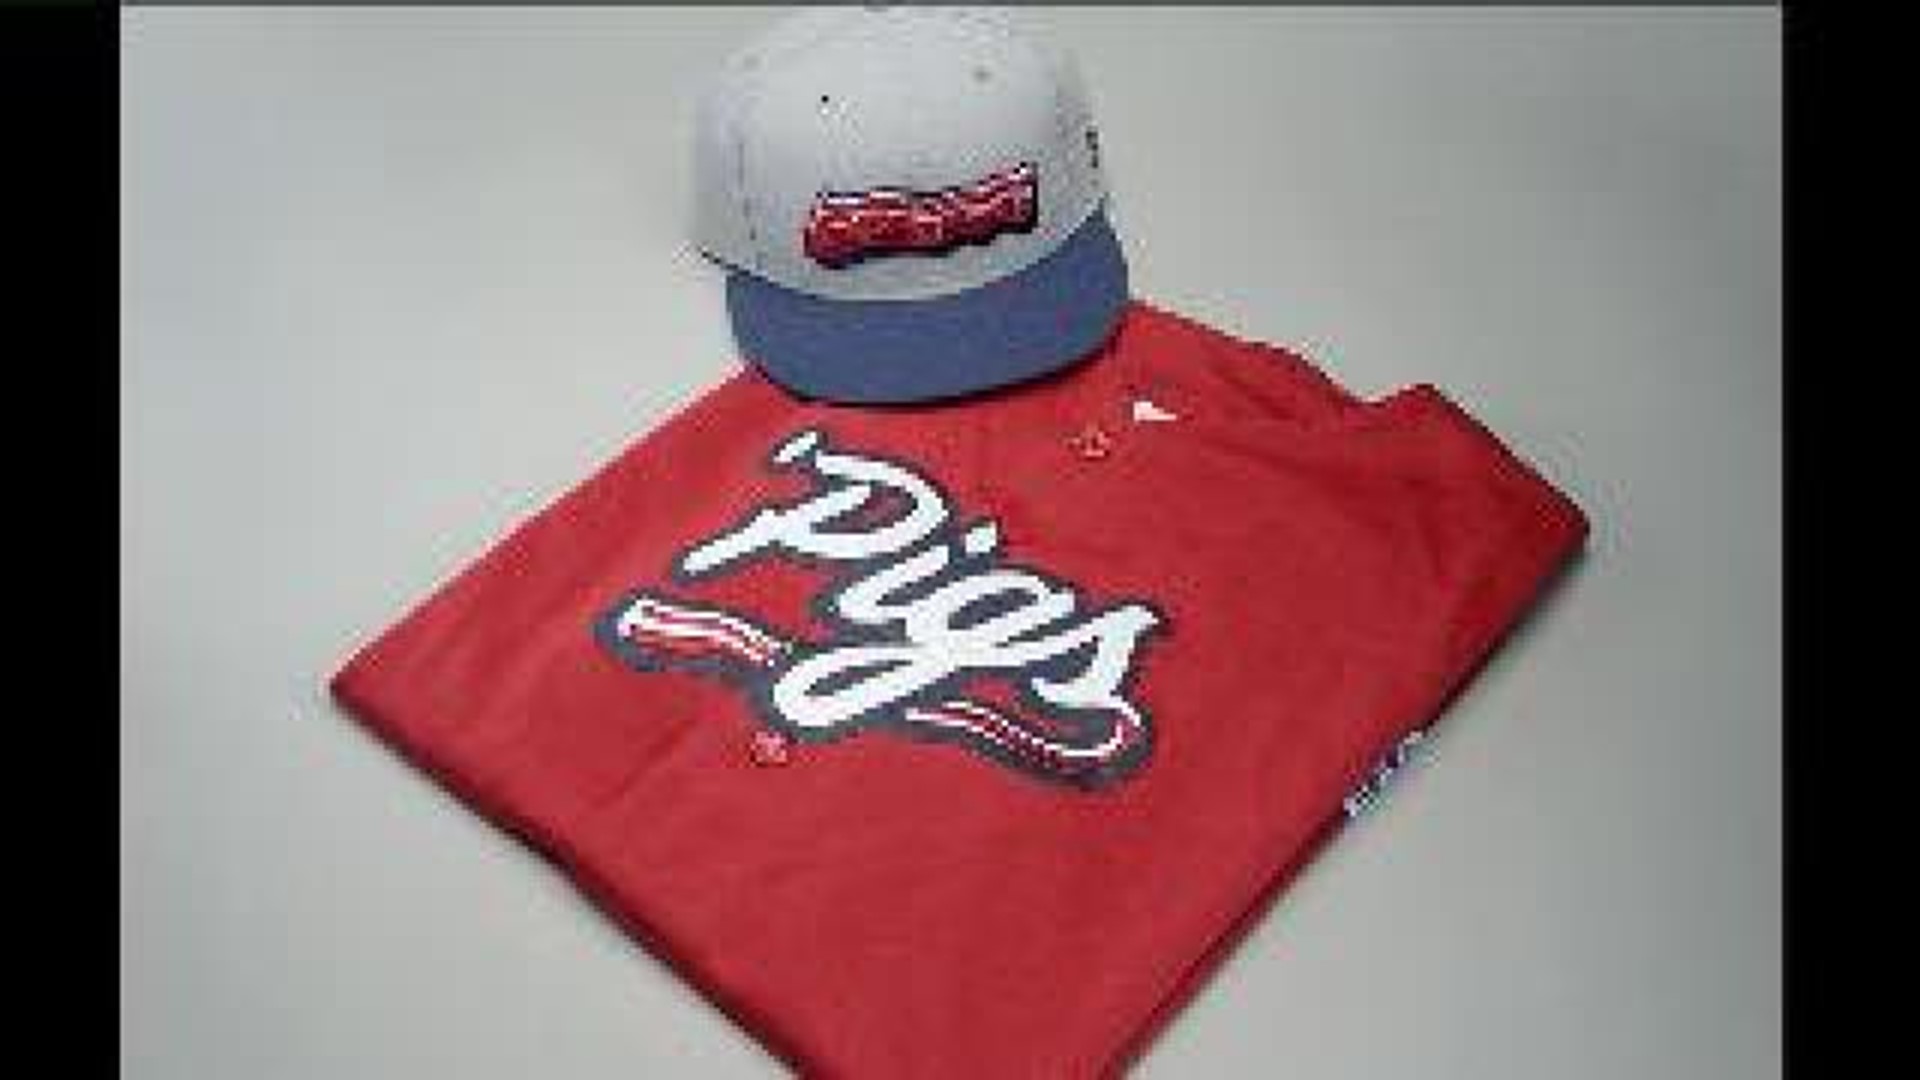 IronPigs Launch New Uniforms Featuring... Bacon?